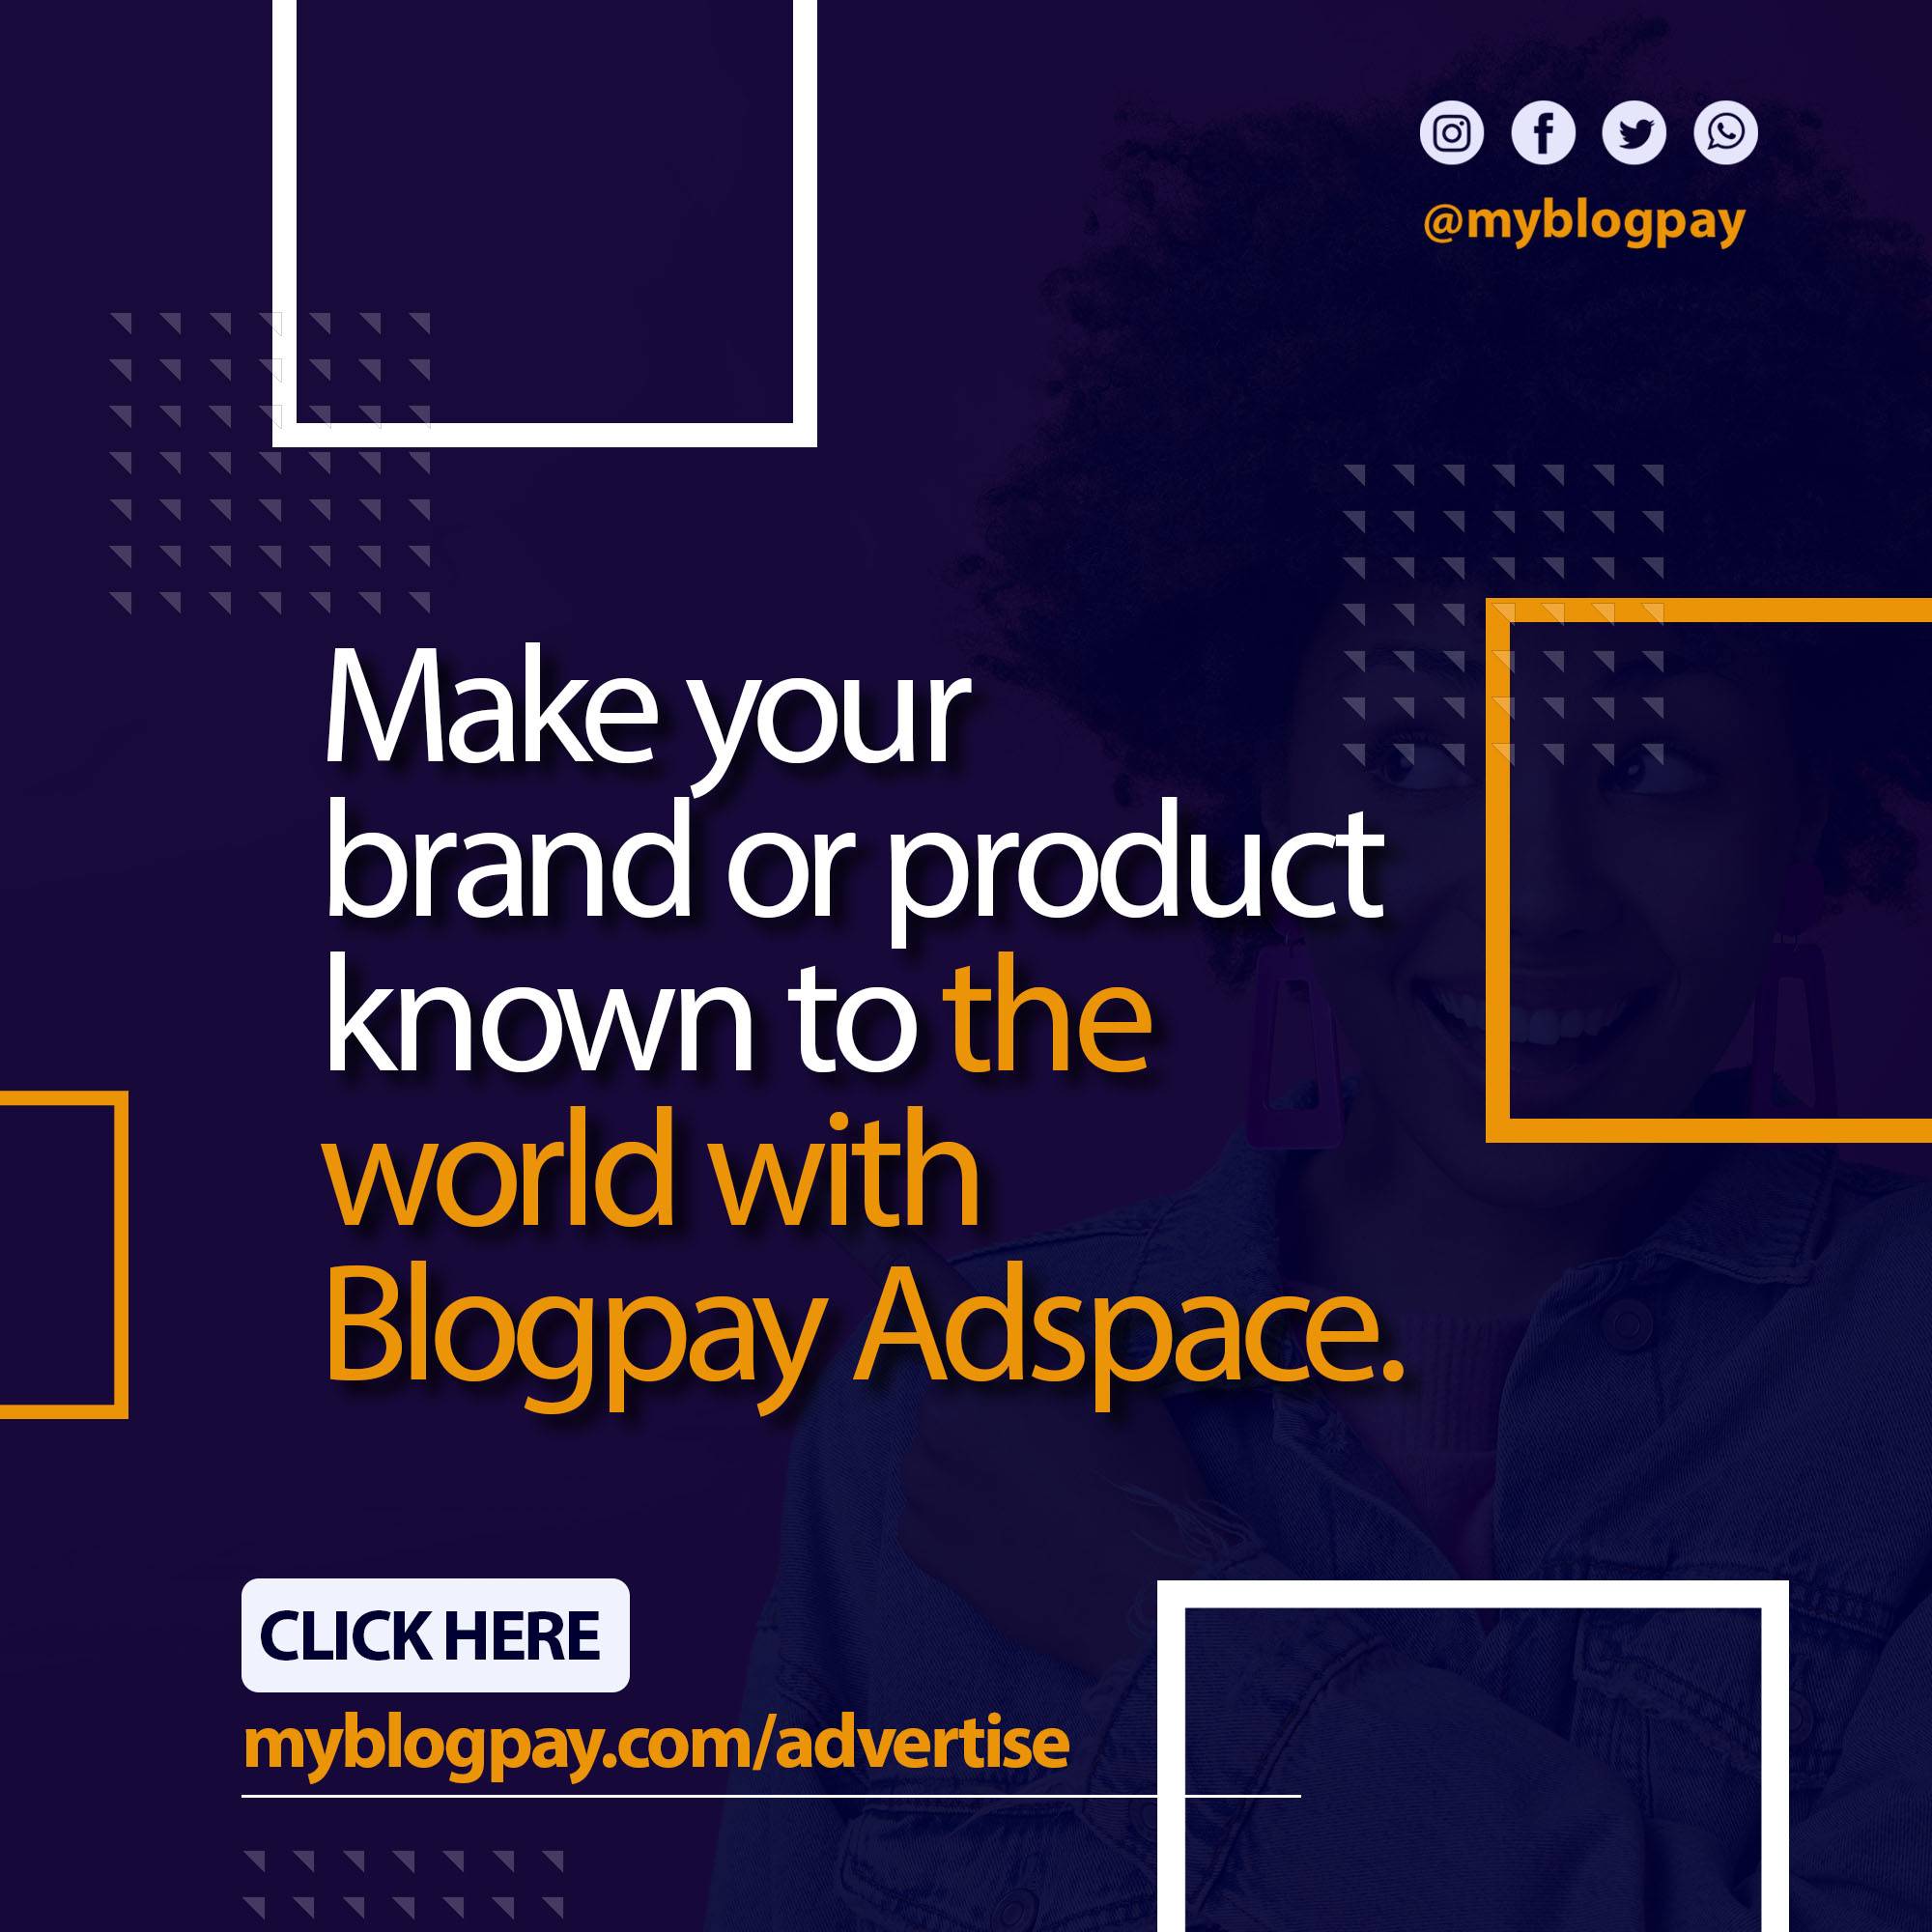 blogpay adspace banner